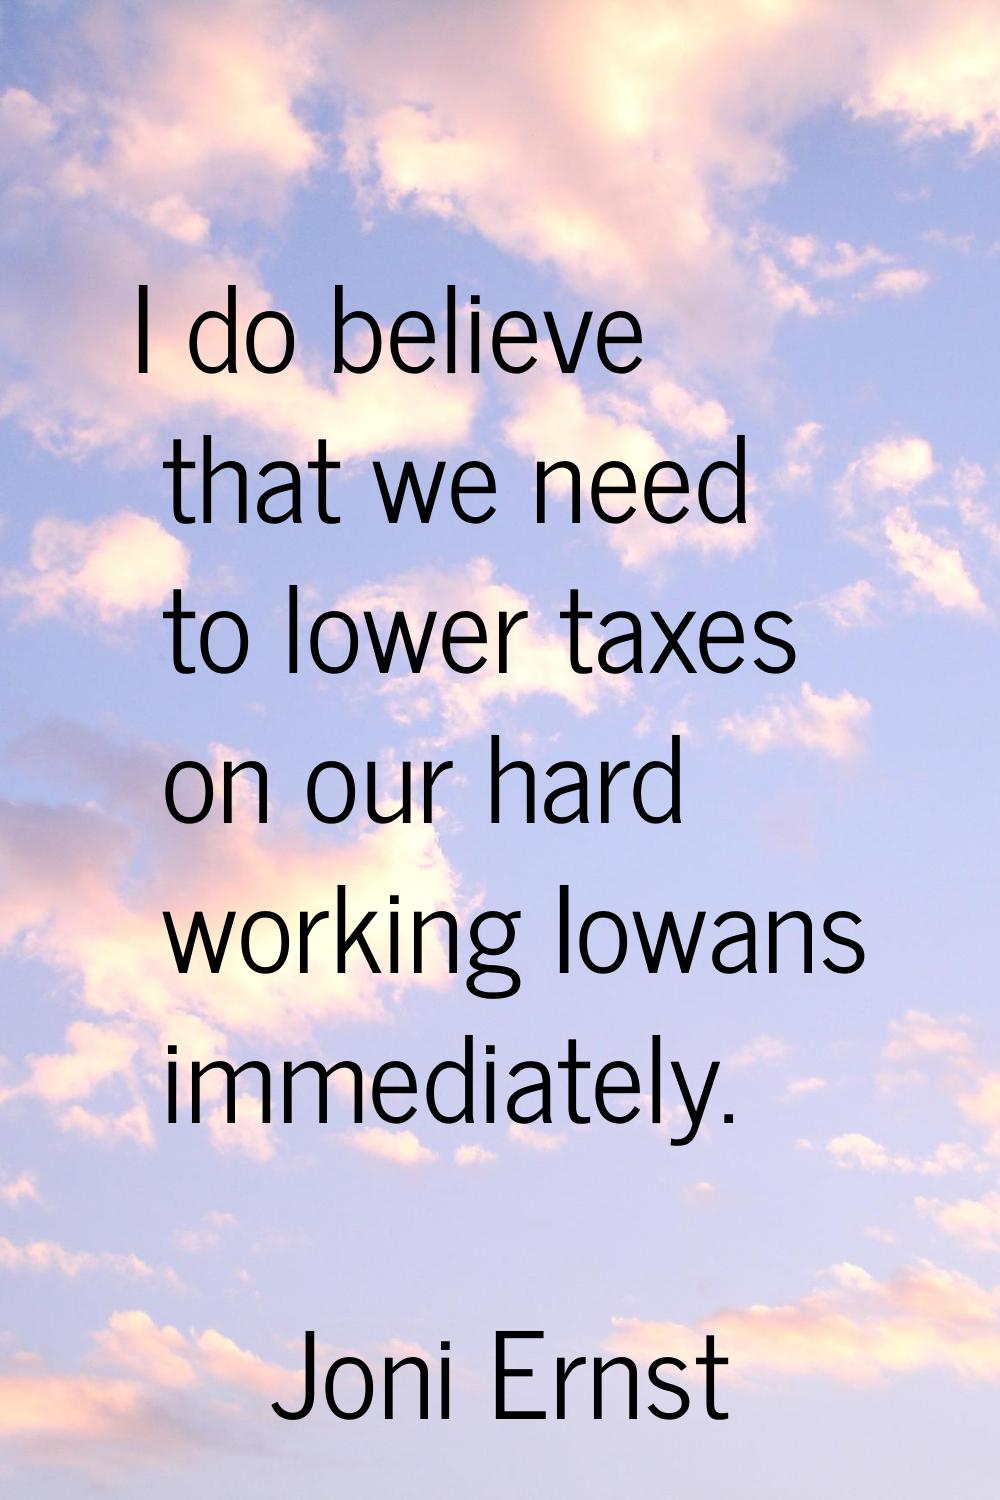 I do believe that we need to lower taxes on our hard working Iowans immediately.